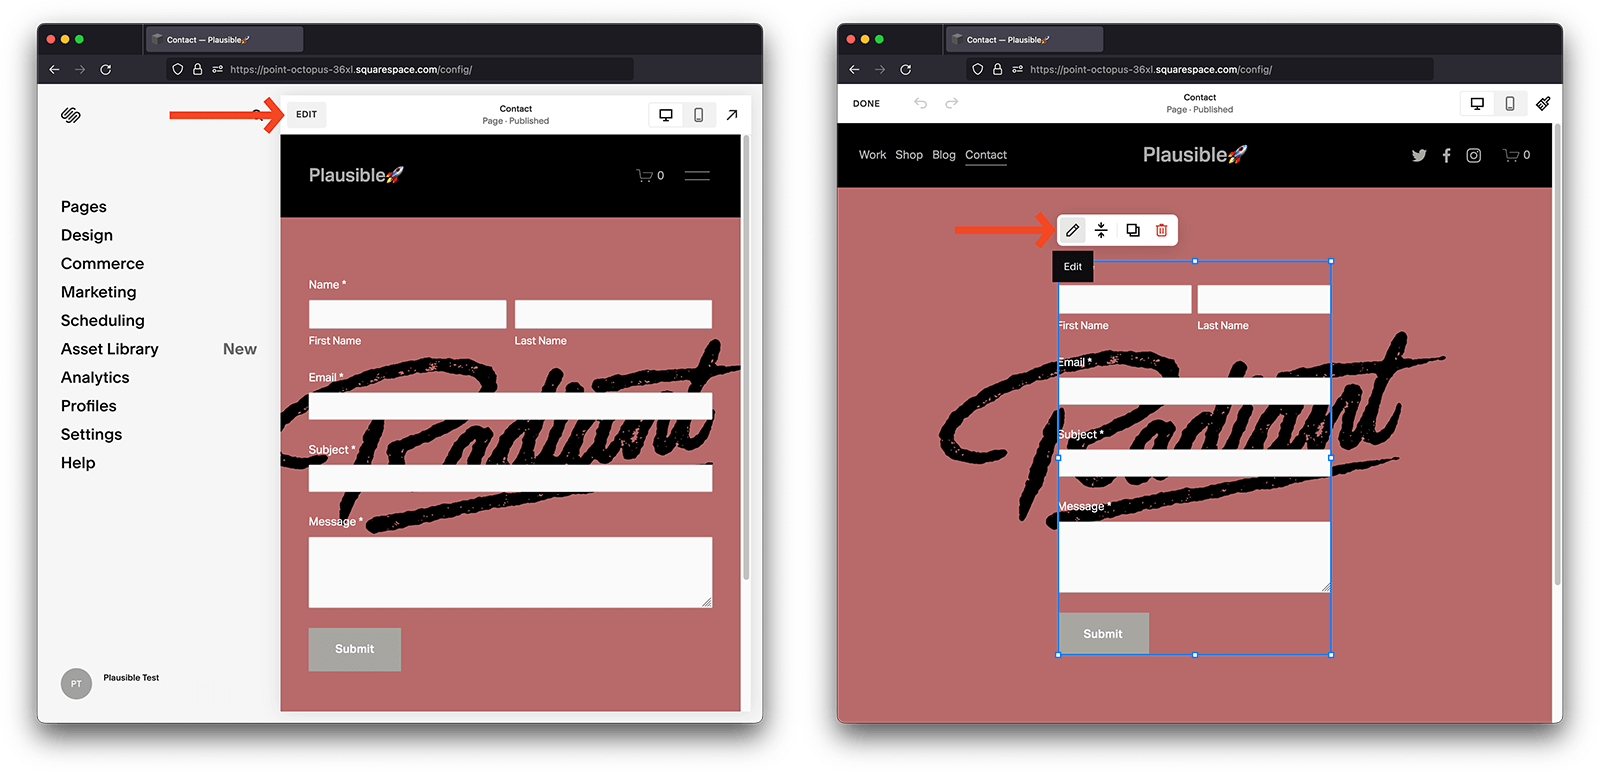 Edit the form in Squarespace